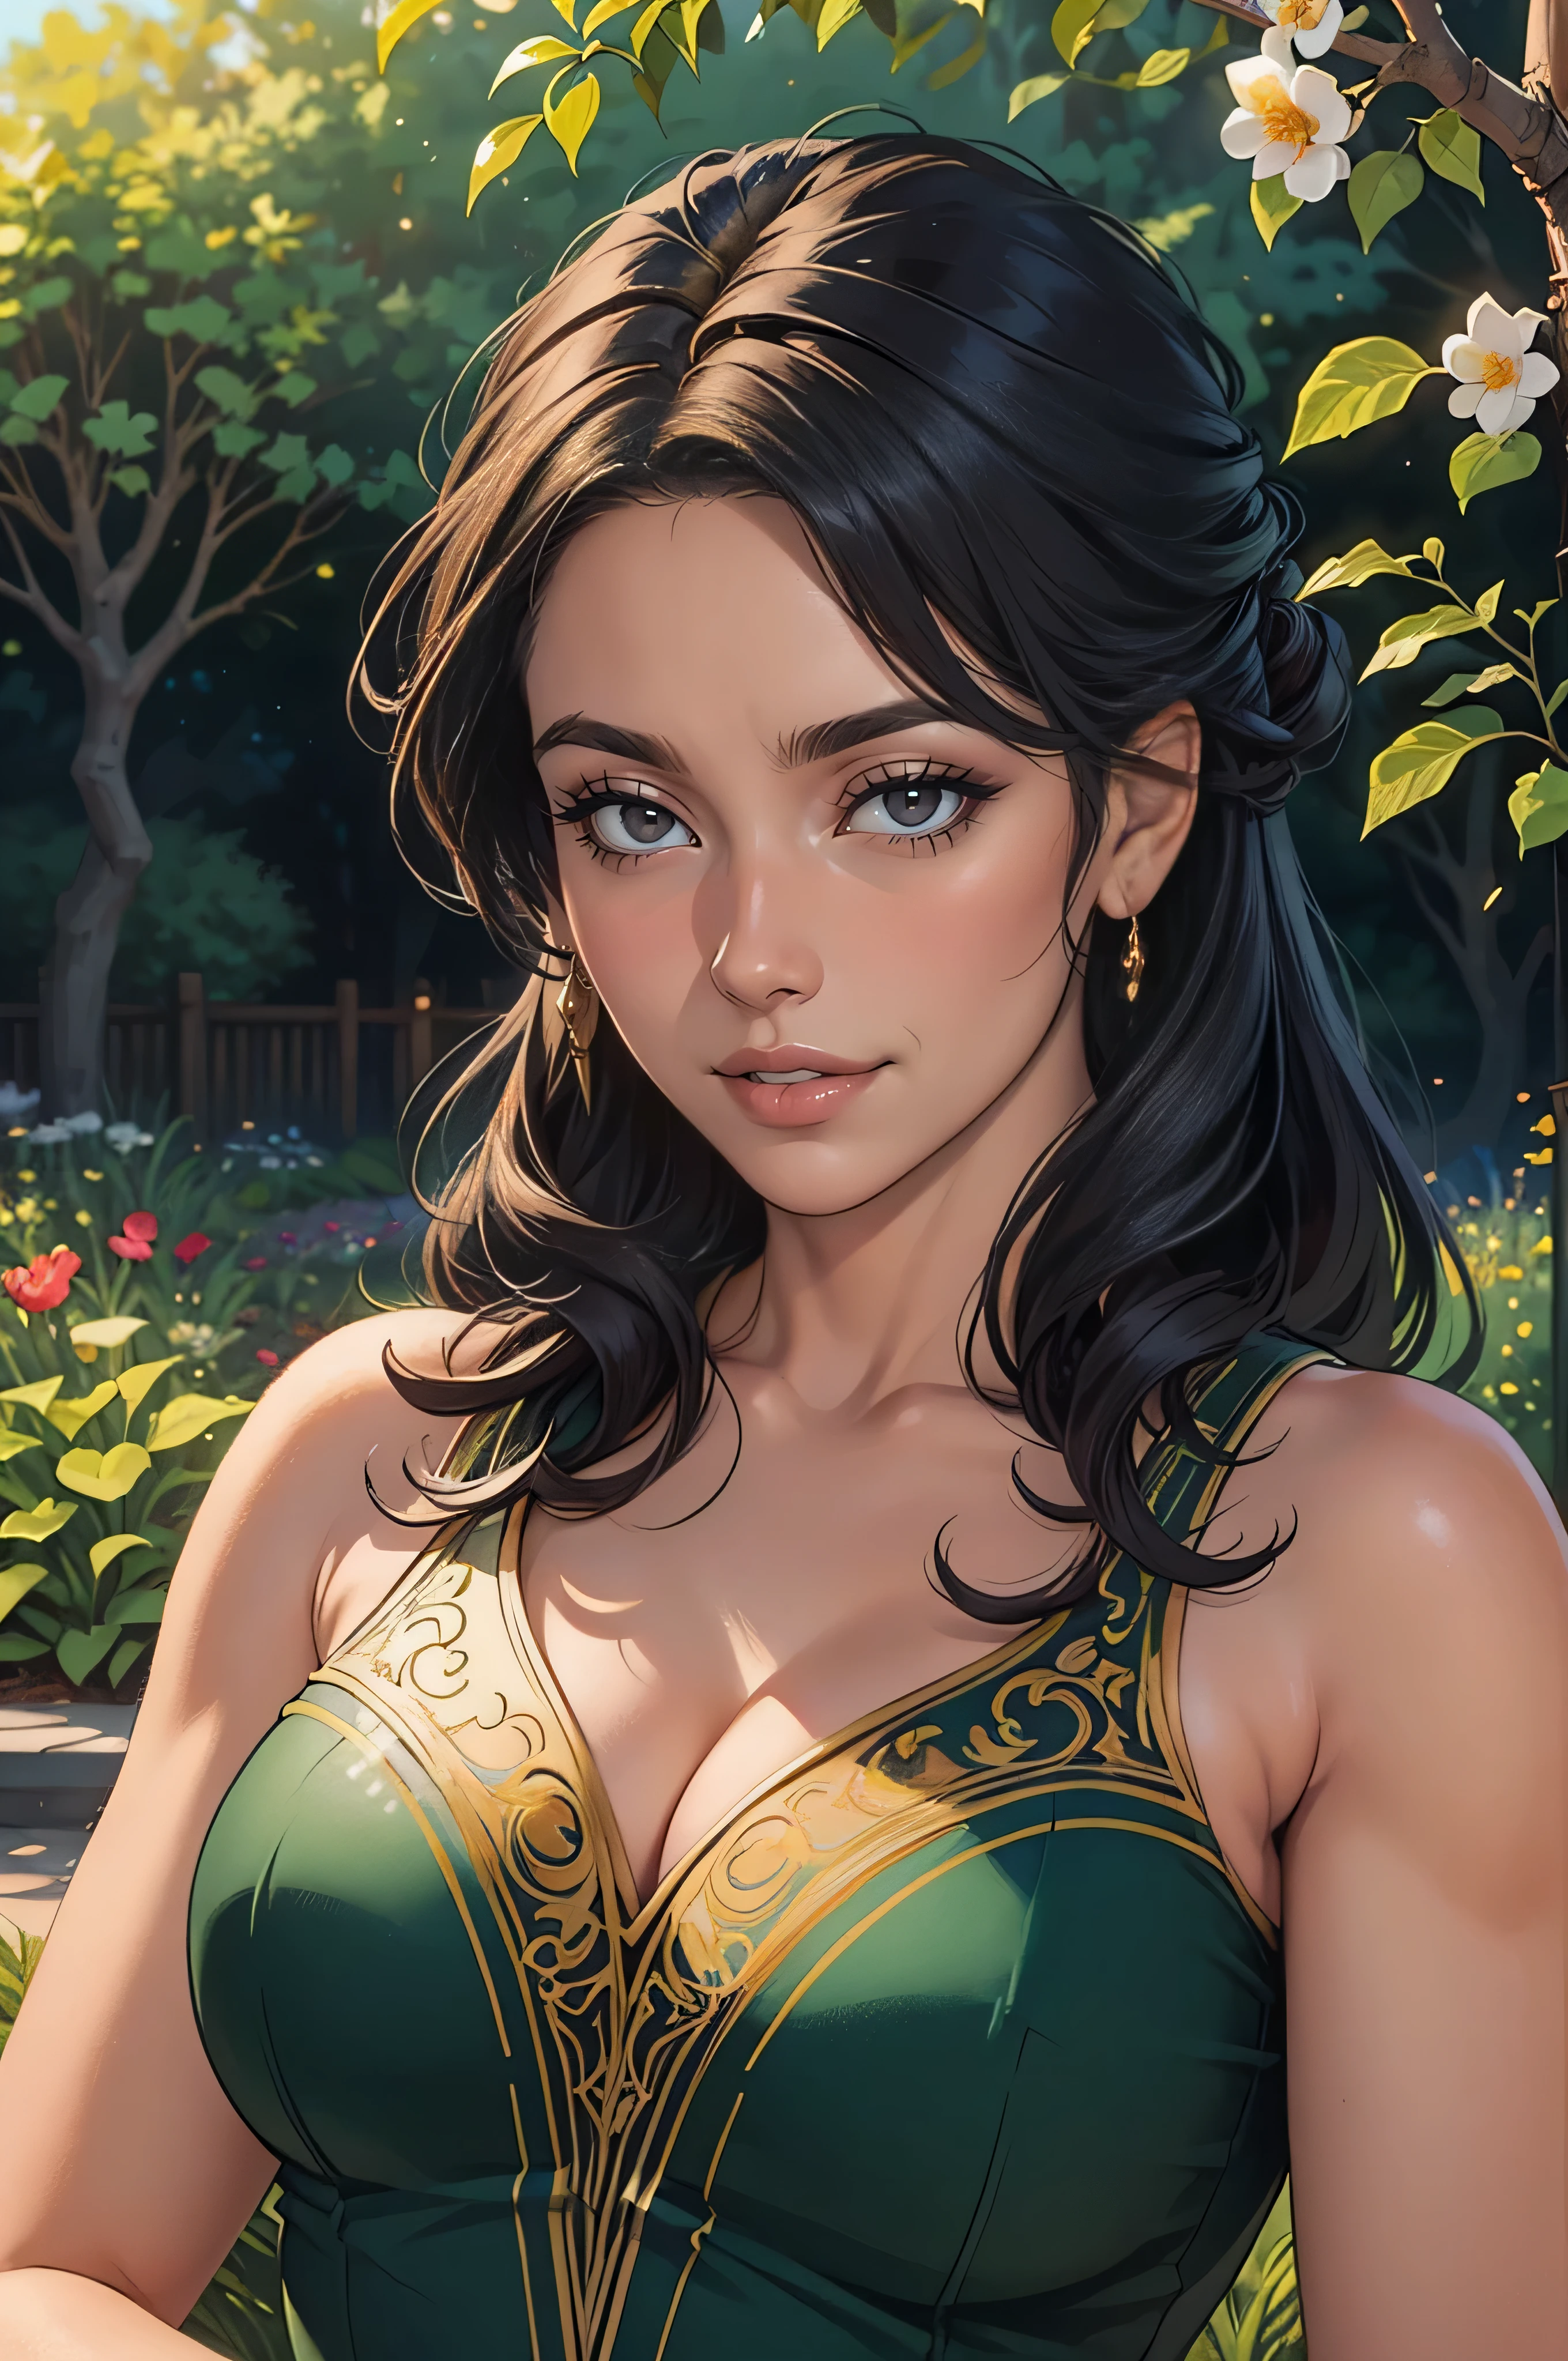 A girl with beautiful detailed eyes and lips, medium: oil painting, in a garden. The girl has long eyelashes and a captivating gaze. She is wearing a flowing gown, adorned with vibrant colors and intricate patterns. The garden is filled with lush greenery and vibrant flower beds, creating a peaceful and serene atmosphere. The sunlight filters through the leaves, casting a soft, warm glow on the scene. The artwork should have the best quality, with ultra-detailed features and a realistic, photorealistic style. The colors should be vivid and vibrant, showcasing the beauty of the girl and the garden.